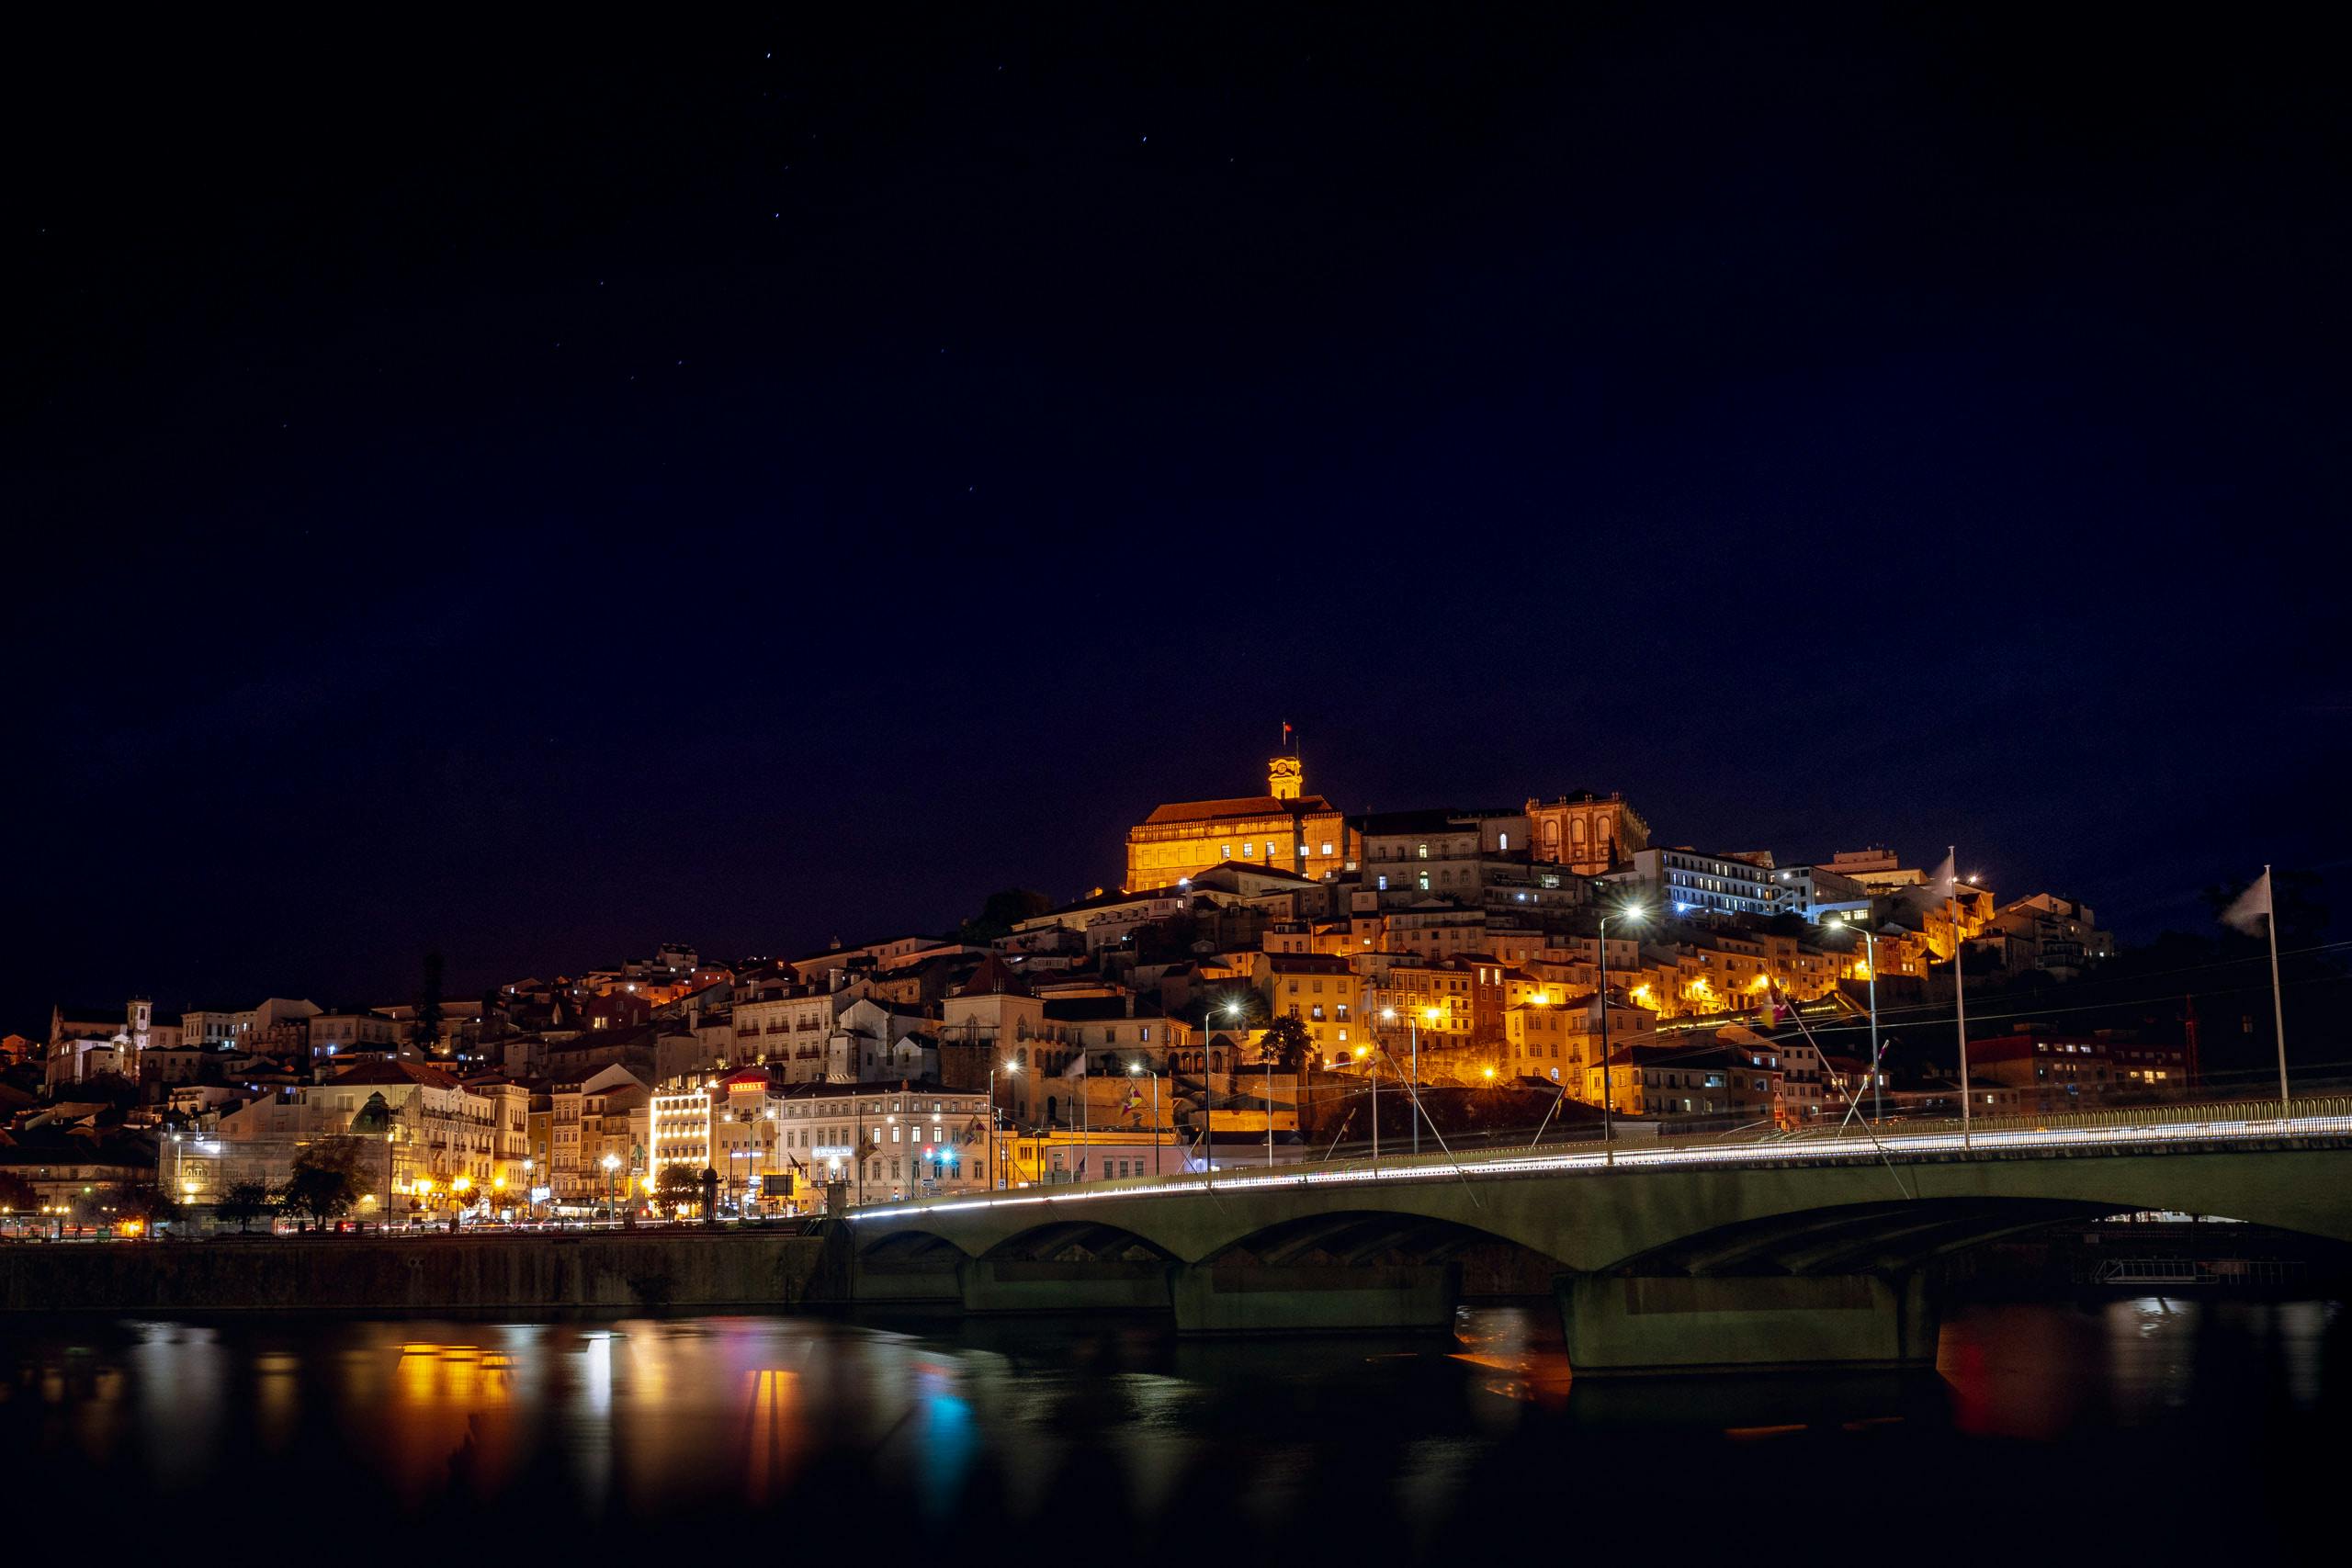 City of Coimbra in the night by the river with a bridge on the right